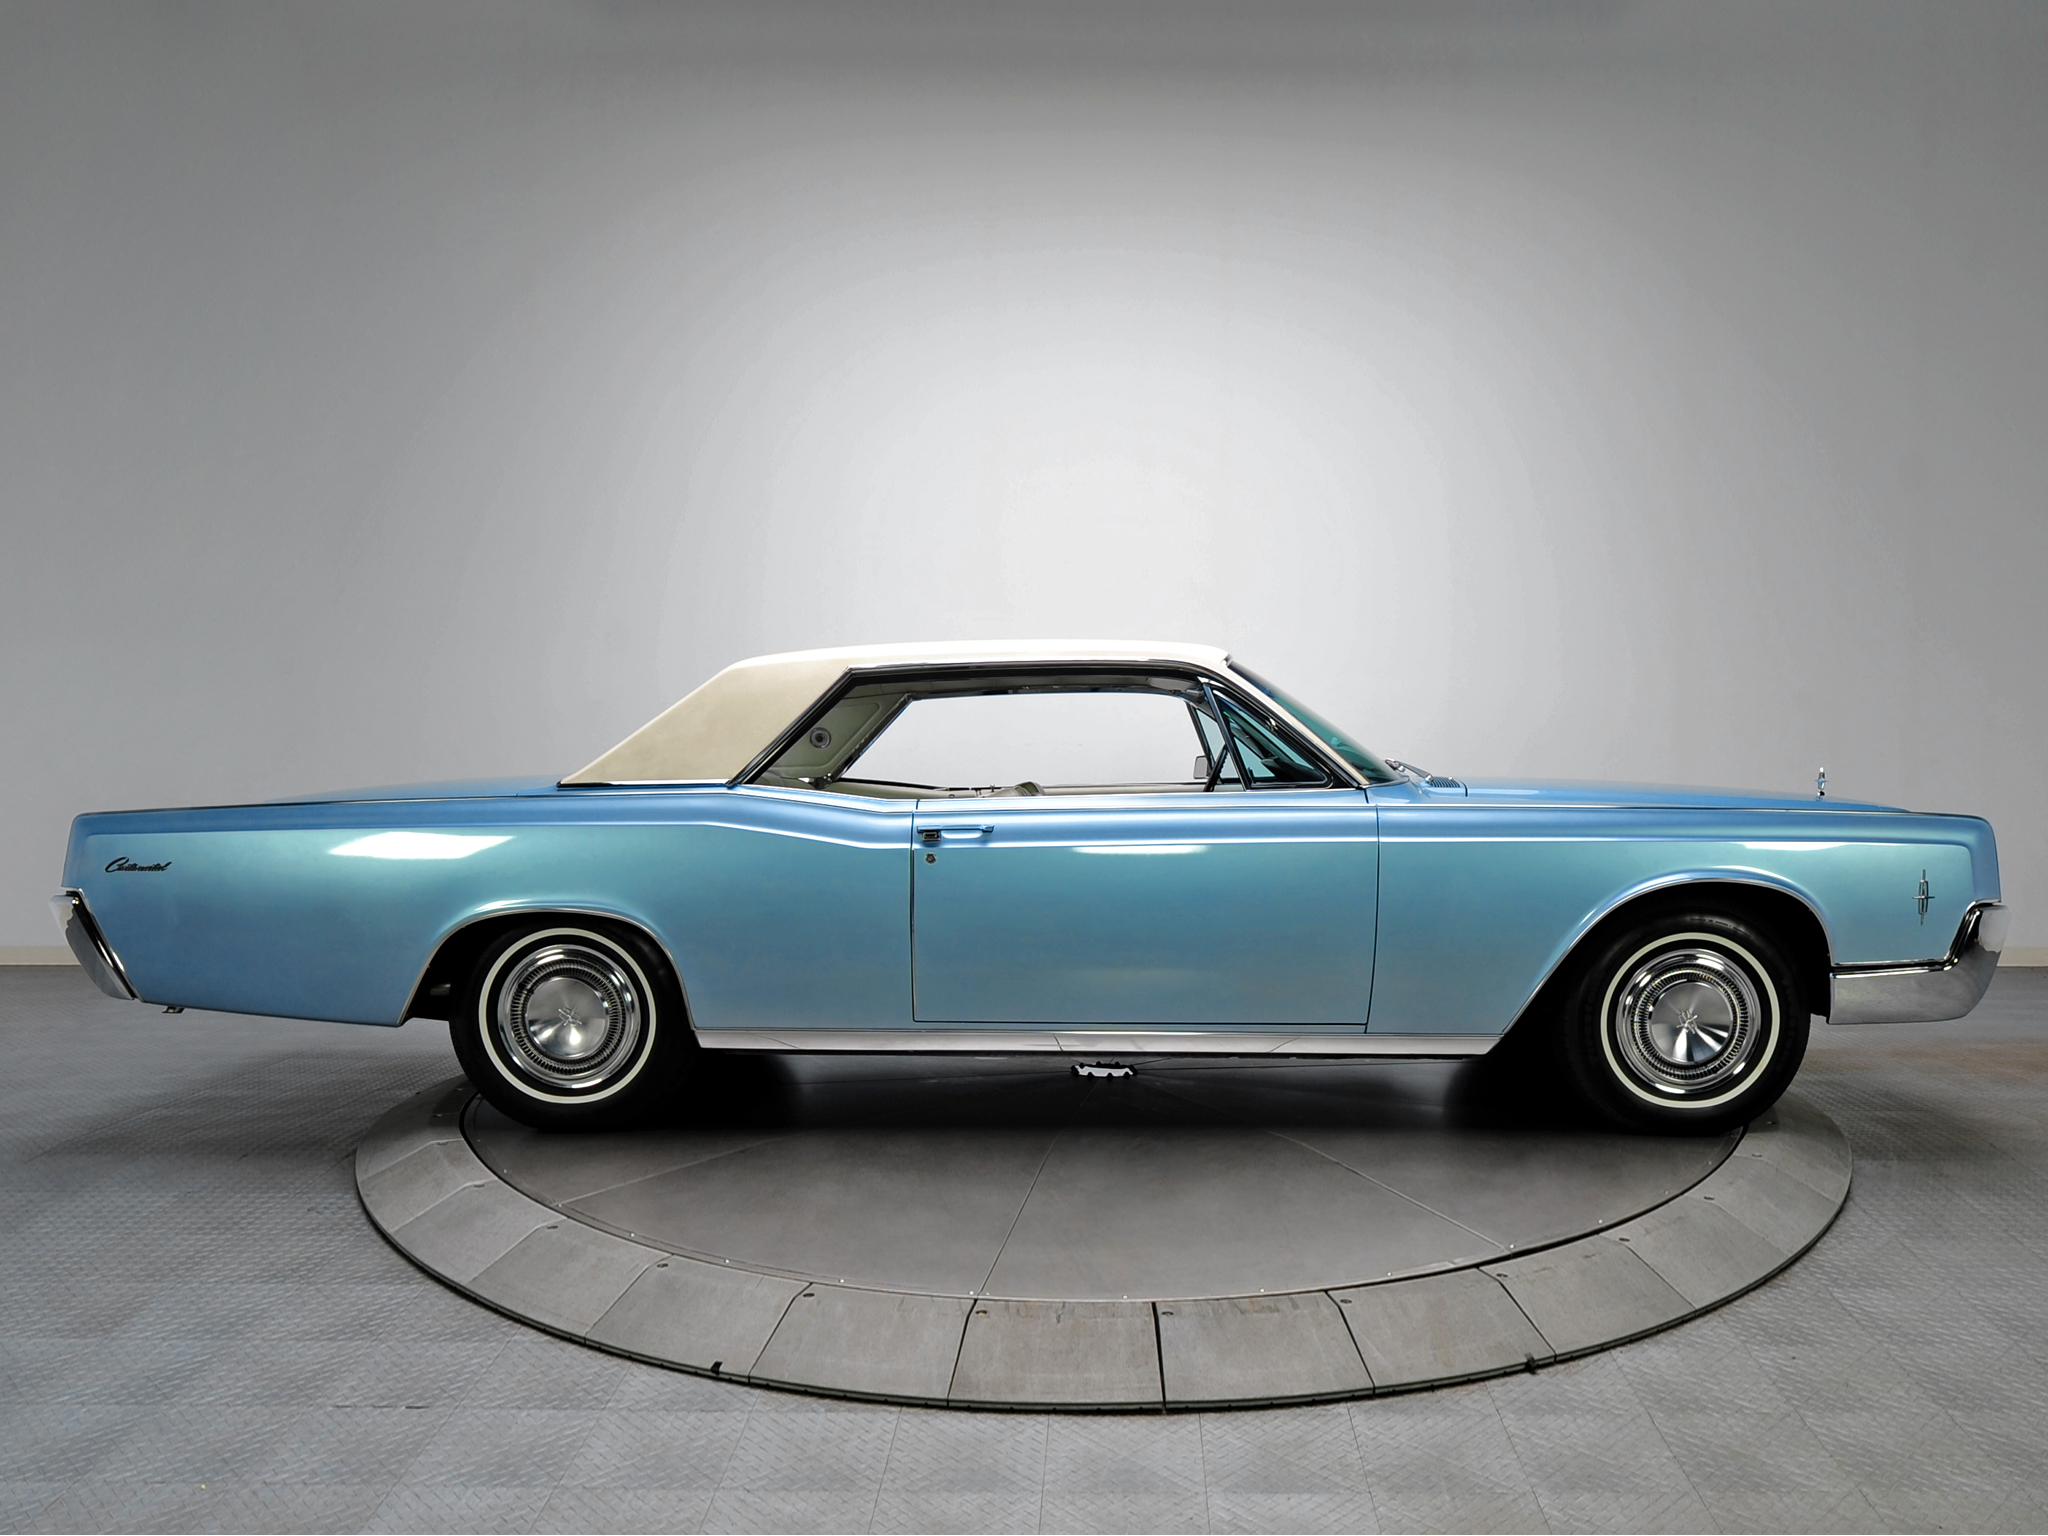 1966, Lincoln, Continental, Hardtop, Coupe, Classic, Luxury, Hs Wallpaper